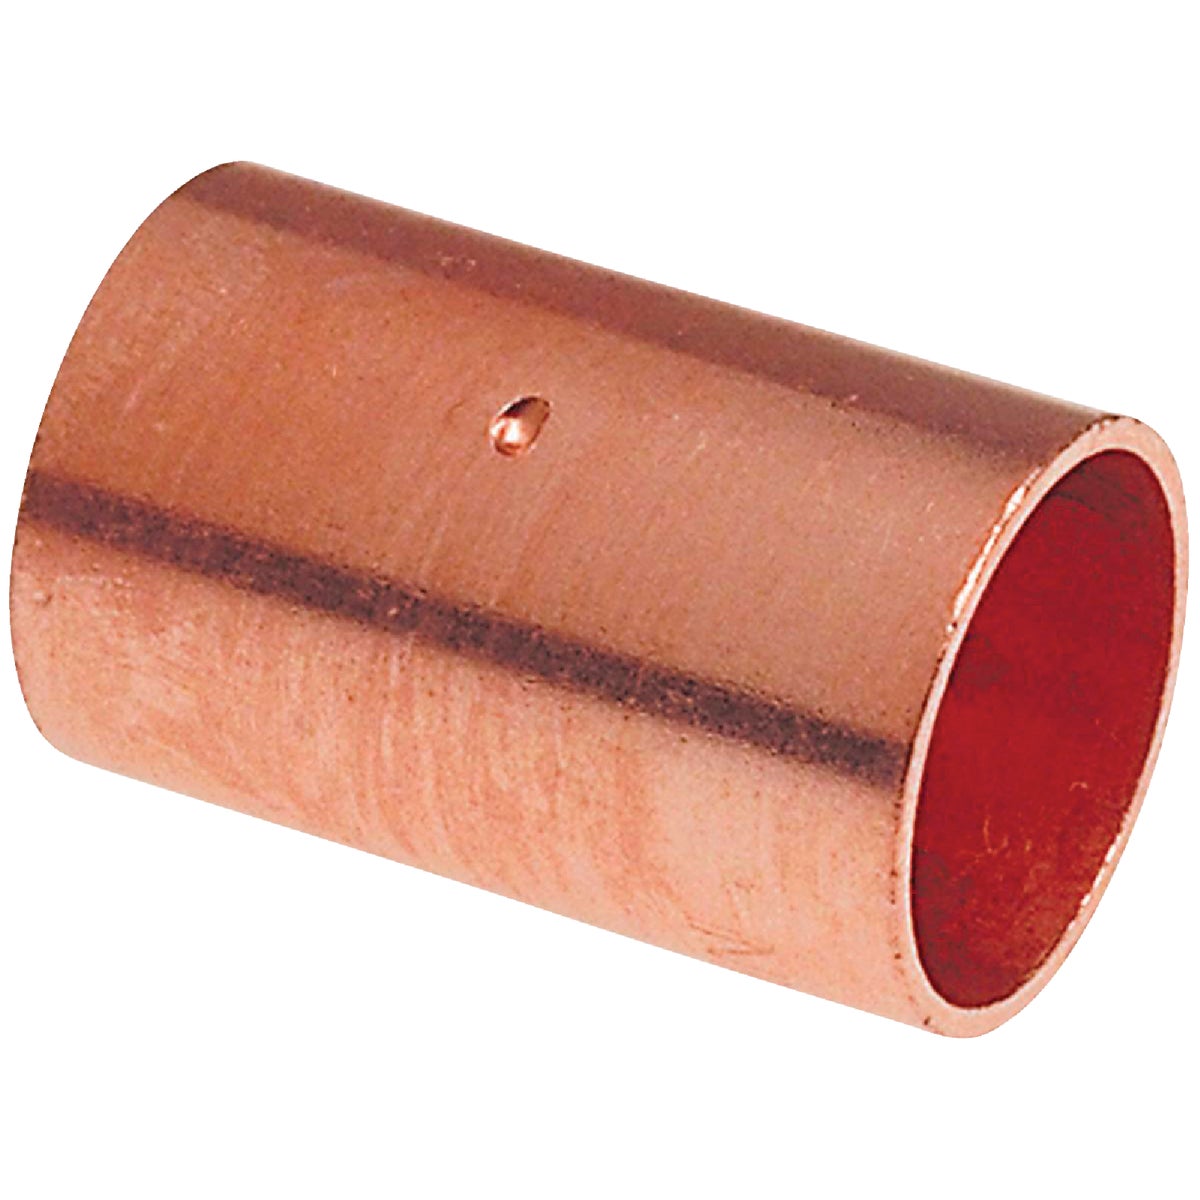 Item 440485, Coupling is copper to copper with stop.